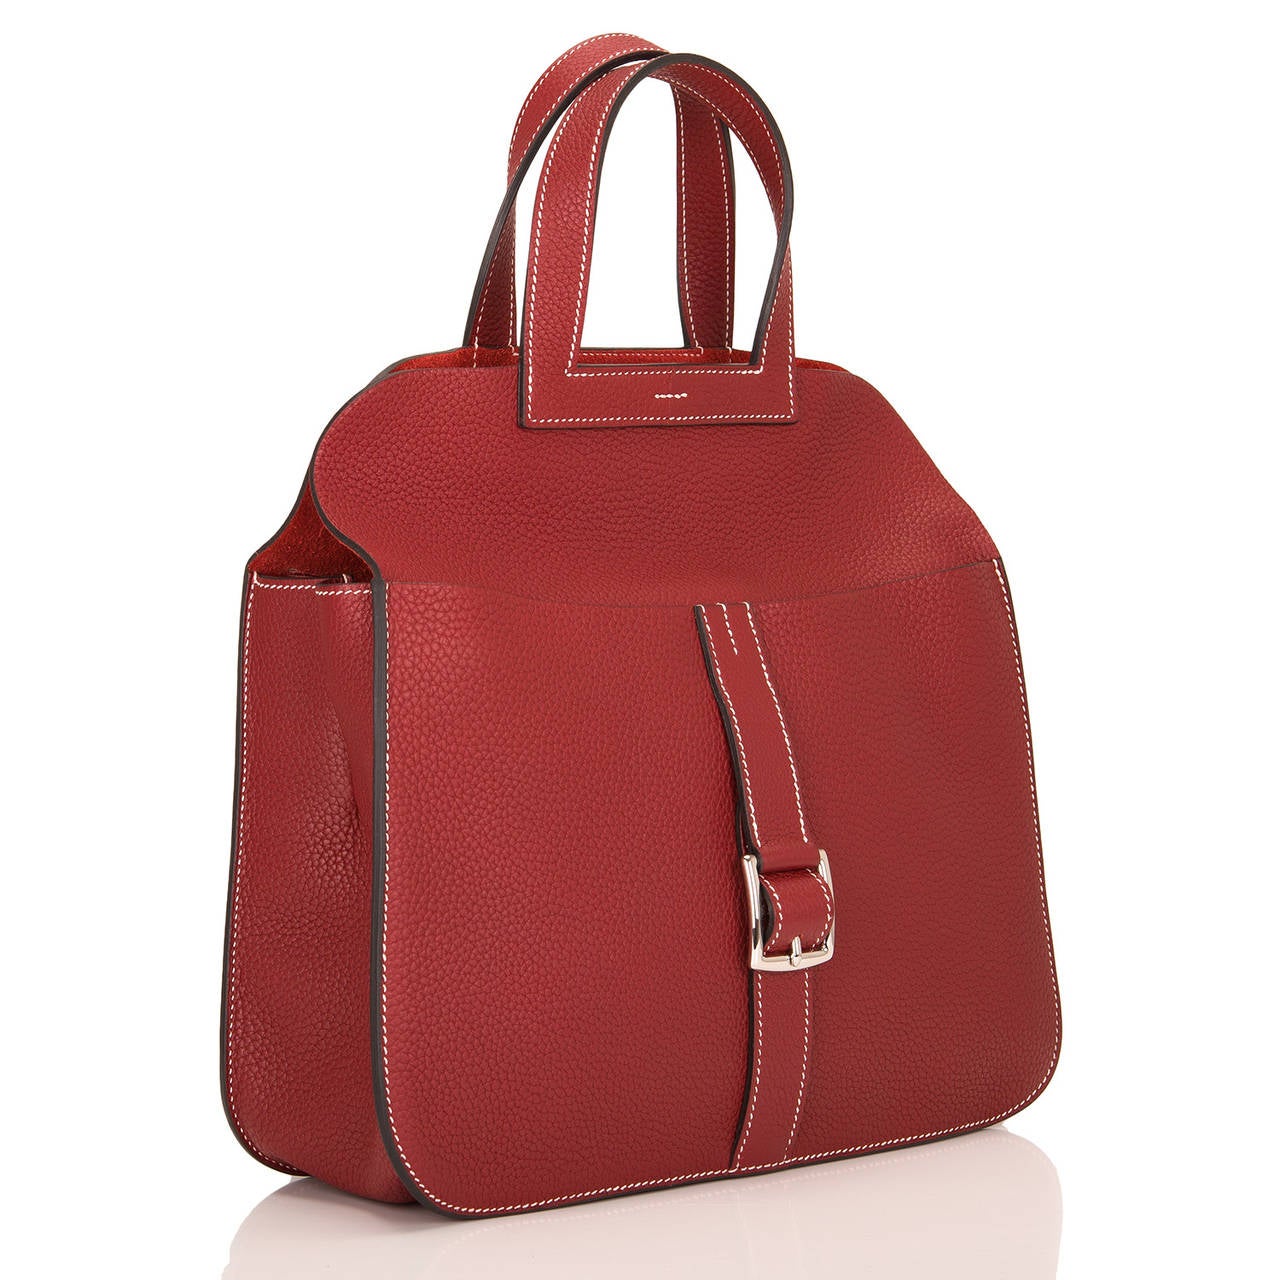 This Hermes Rouge H Halzan bag is made of clemence leather with white contrast stitching, front buckle closure, two front pockets, two back pockets, and double flat leather handles and attachable single flat leather shoulder strap

The interior is